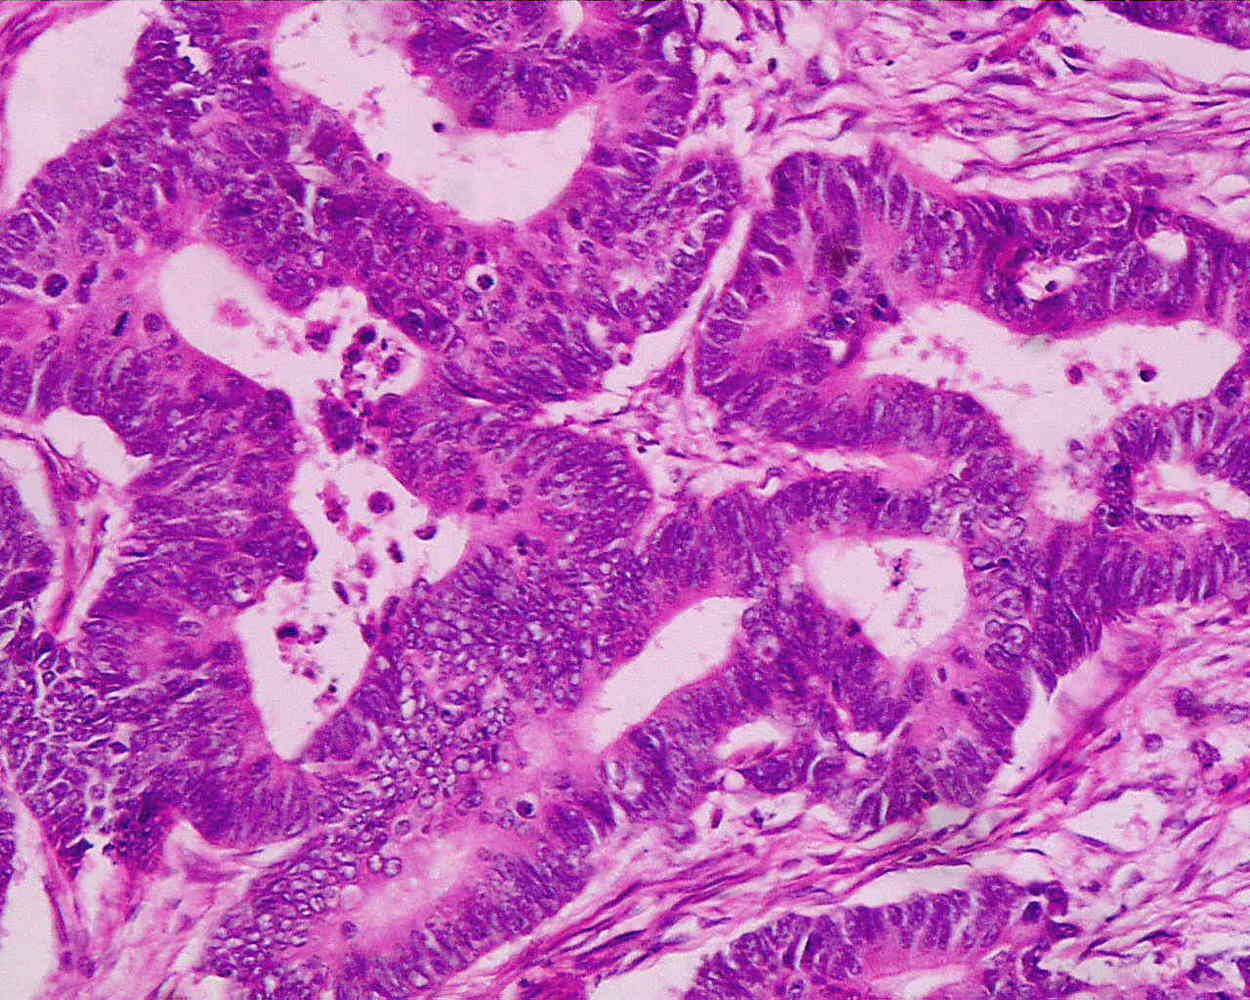 Adenocarcinoma highly diffrerentiaded from the rectum